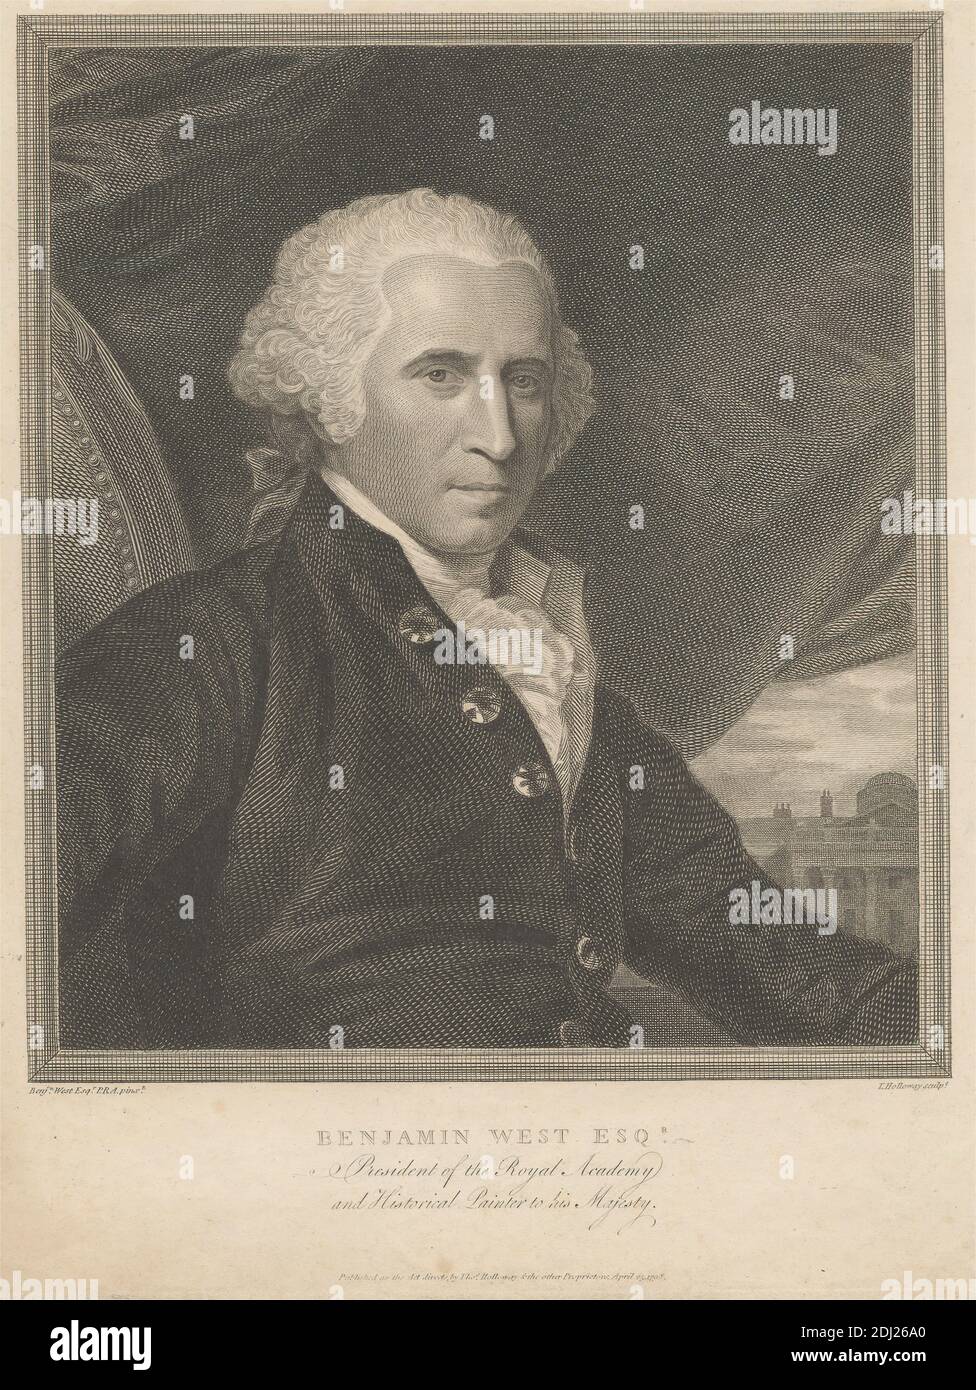 Benjamin West Esqr. Prisident of the Royal Academy and Historical Painter to his Majesty, Print made by Thomas Holloway, 1748–1827, British, after Benjamin West, 1738–1820, American, active in Britain (from 1763), 1798, Engraving Stock Photo